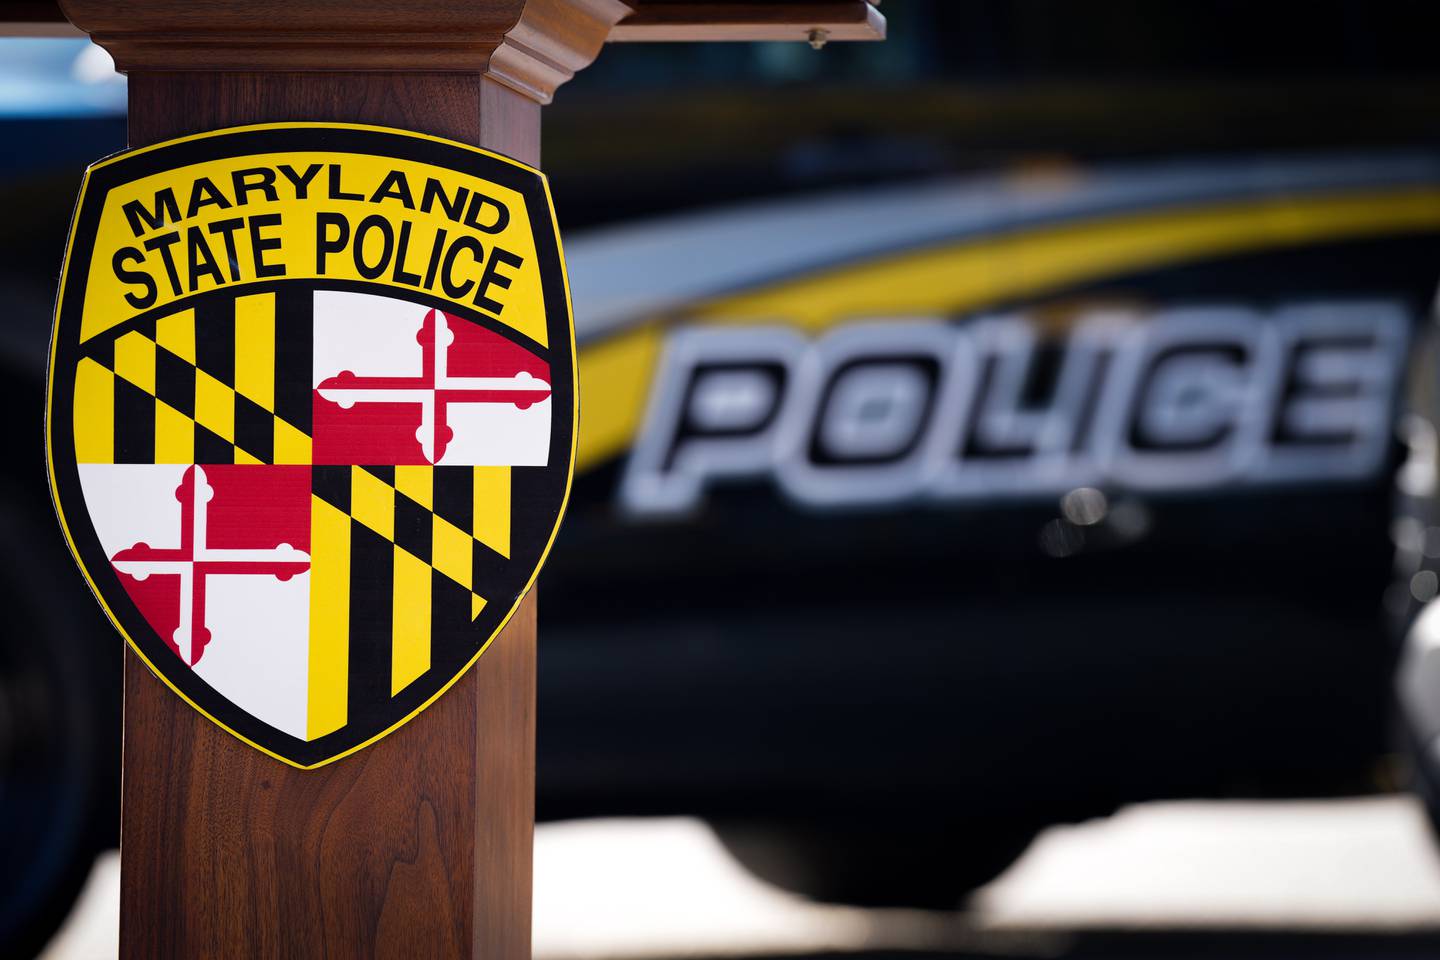 The Maryland State Police logo emblazoned on a lectern in front a police vehicle from a separate agency before a press conference, pictured outside the Maryland State Police Glen Burnie Barracks on 11/10/22.